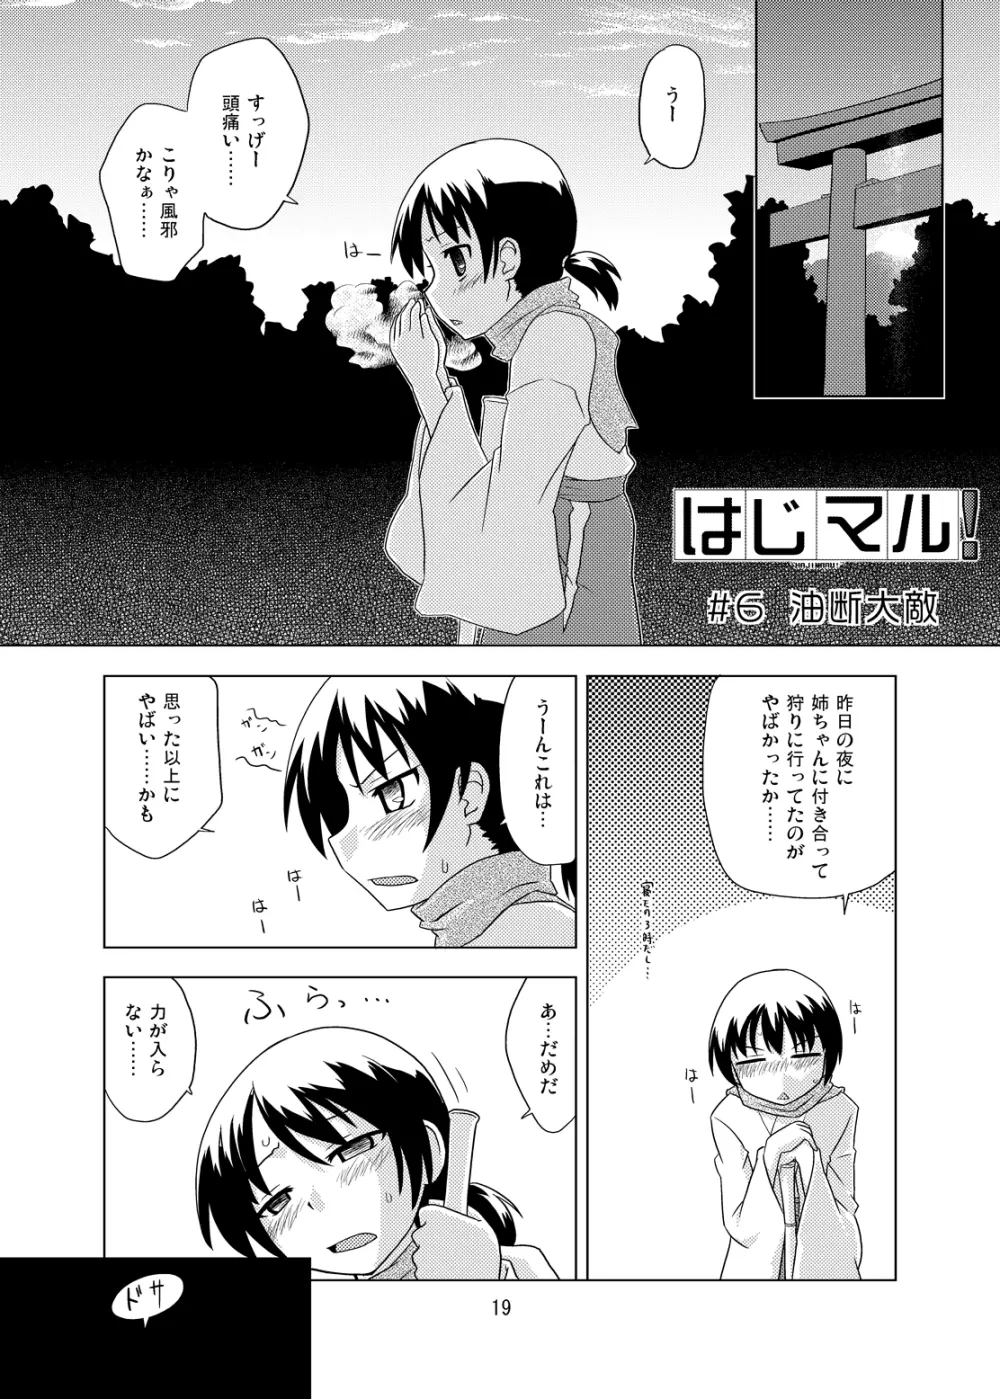 Composition Mix 8 はじマル！6 Page.18